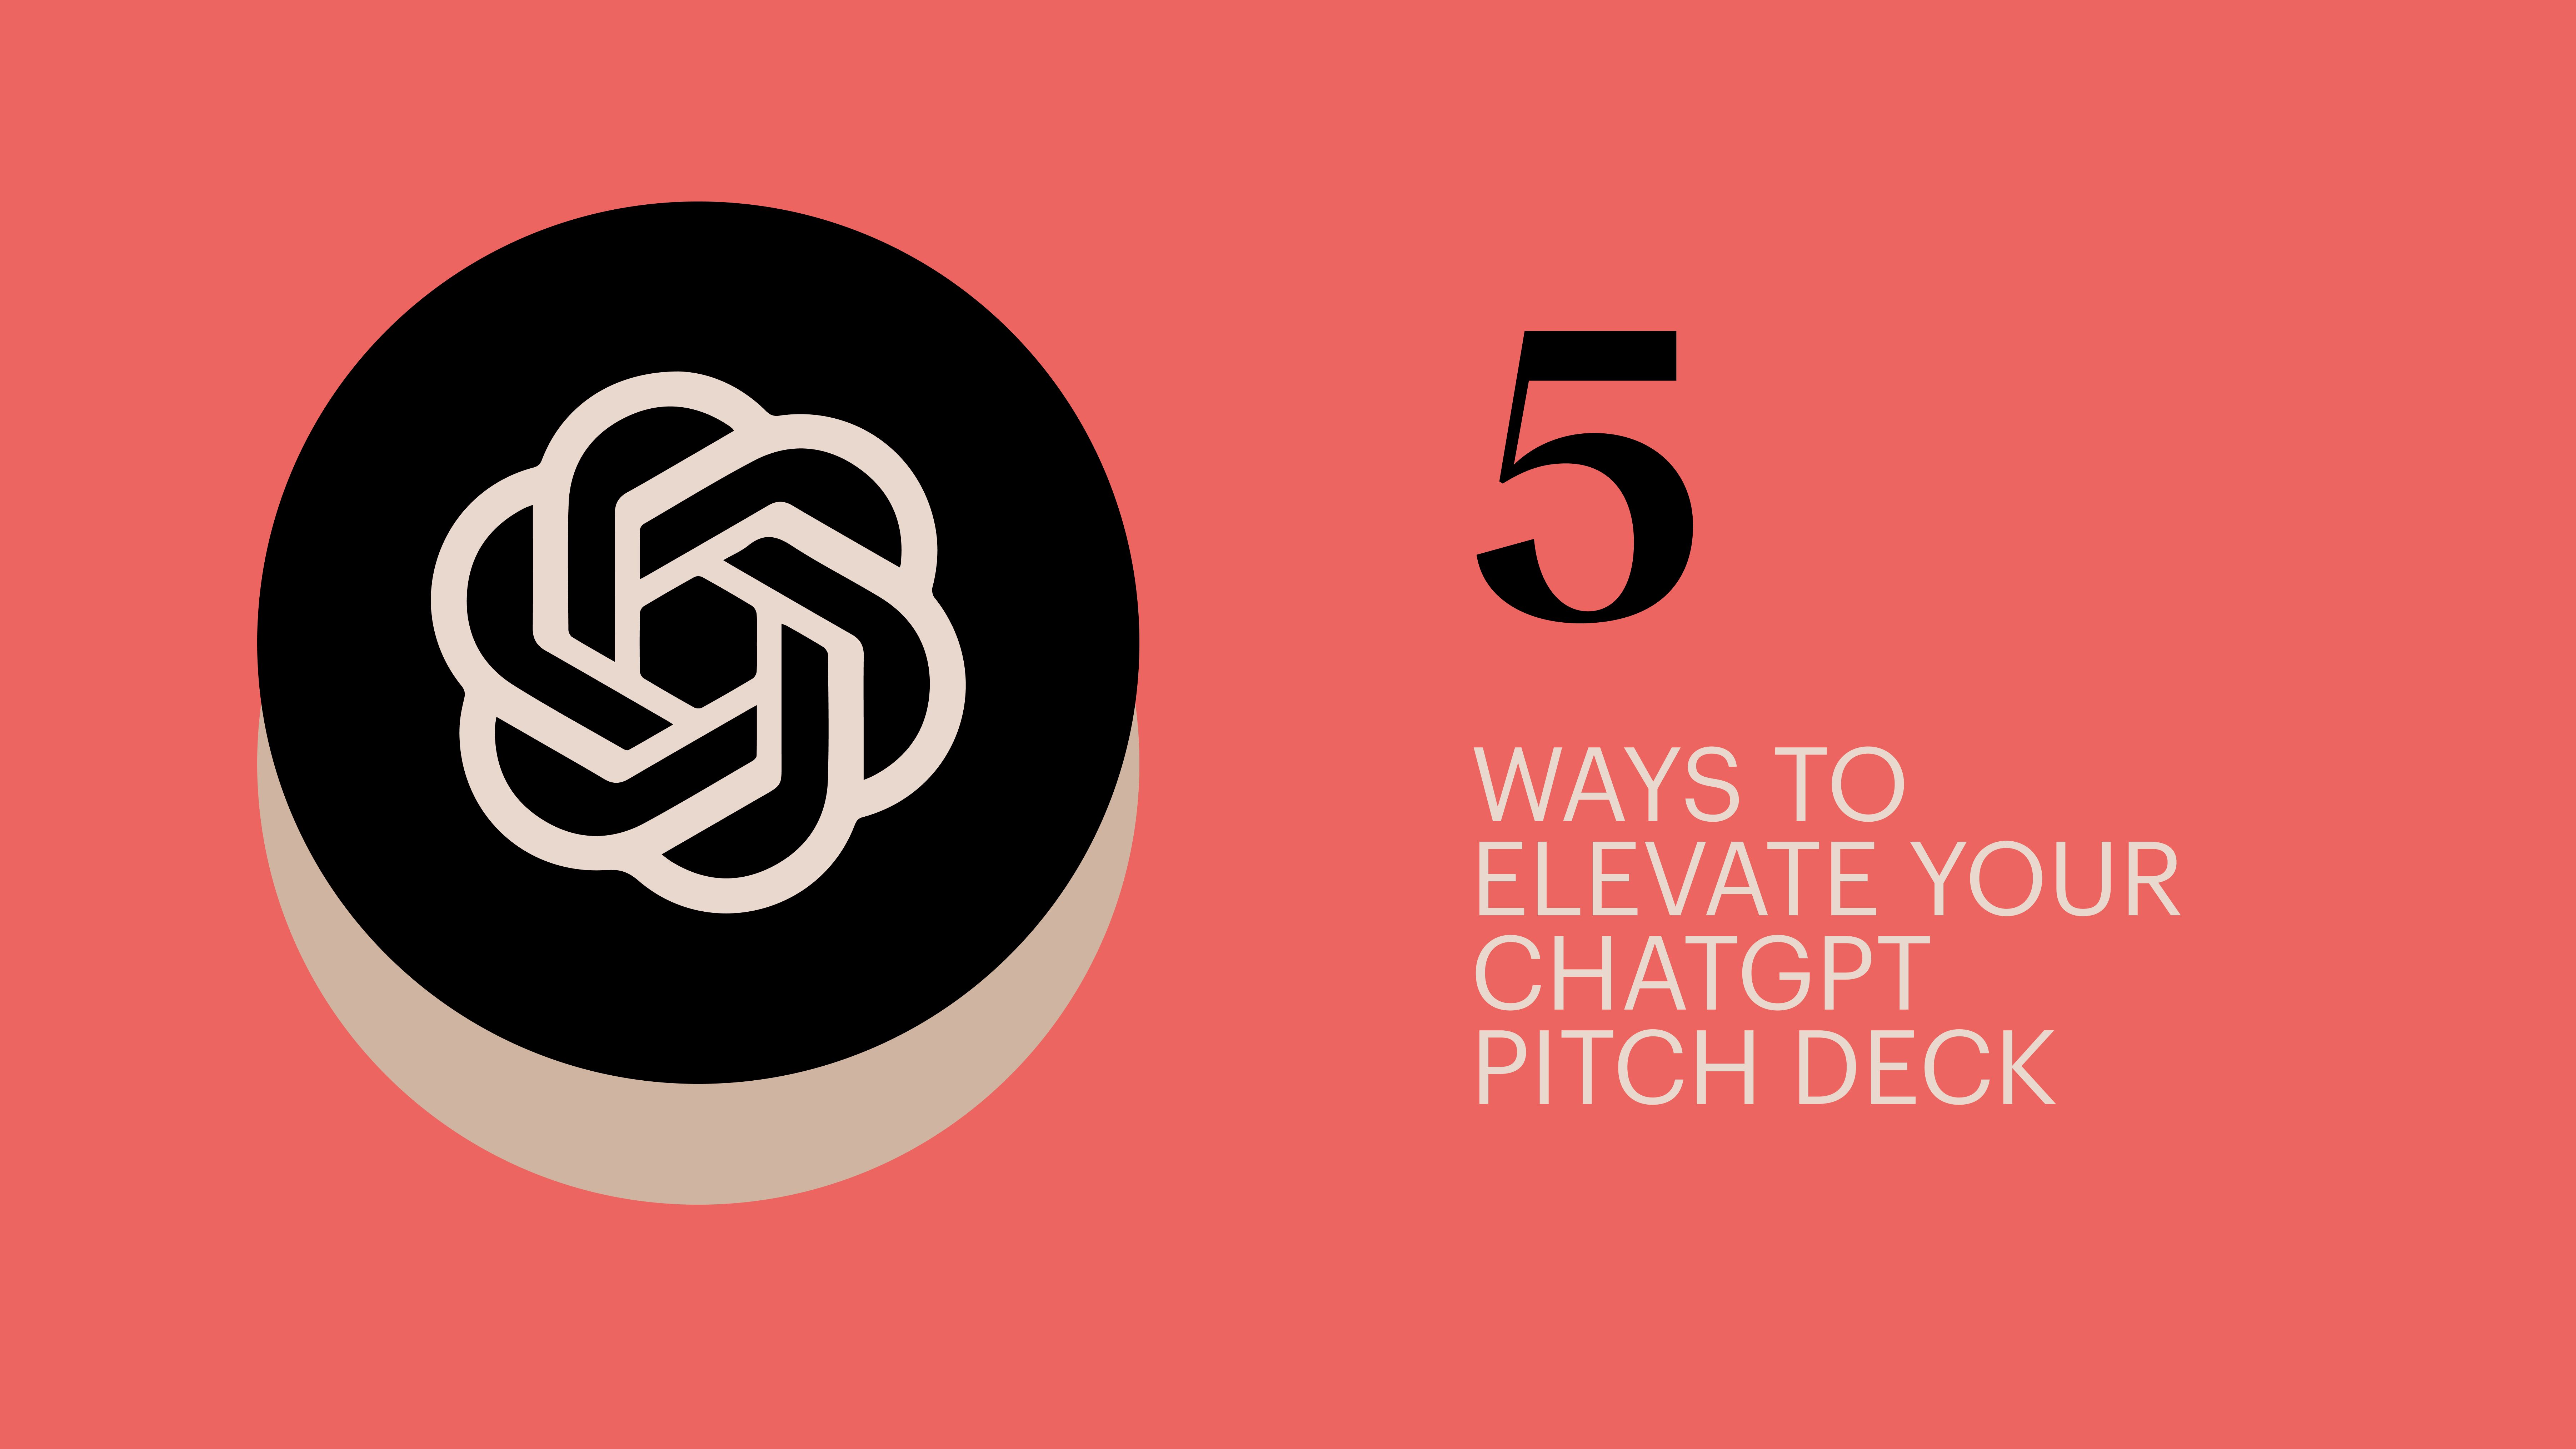 5 Ways To Elevate Your ChatGPT Pitchdeck